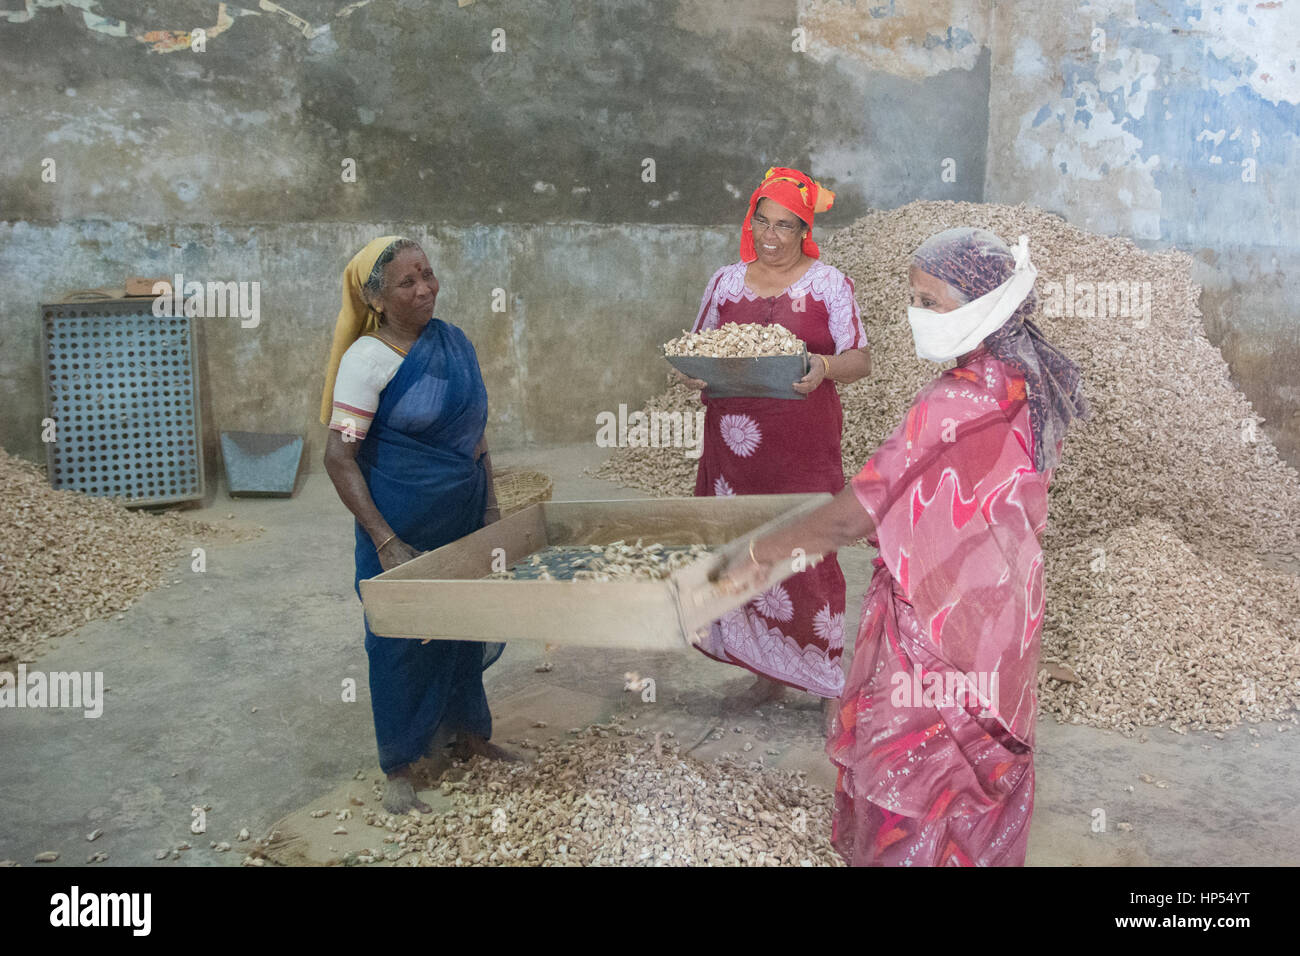 Kochi, India - December 11, 2016 - Women processing huge amounts of ginger in factory Stock Photo